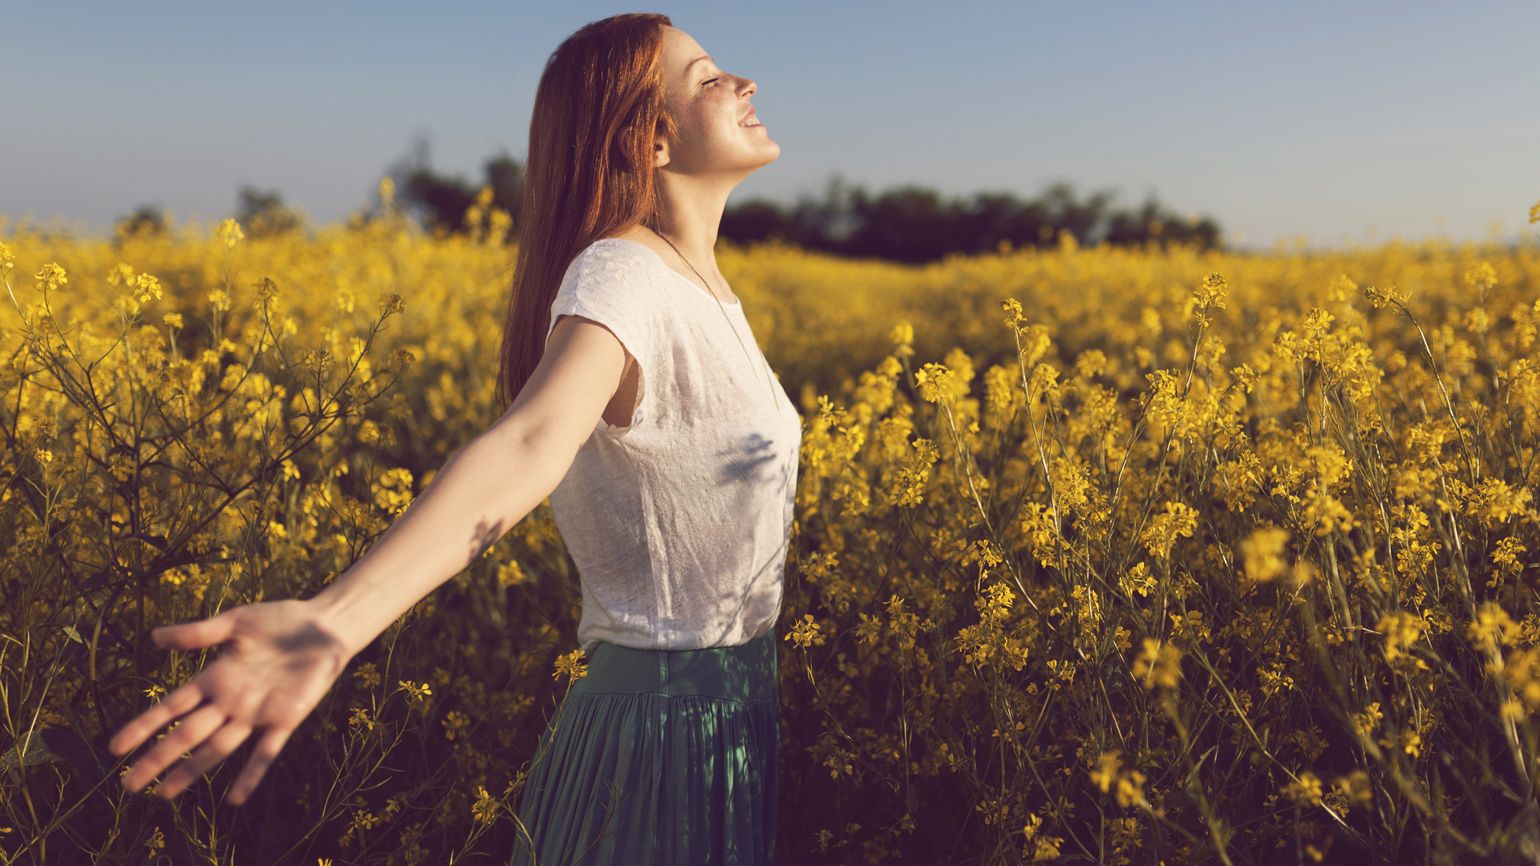 A woman with her arms outstretched in a flower field.